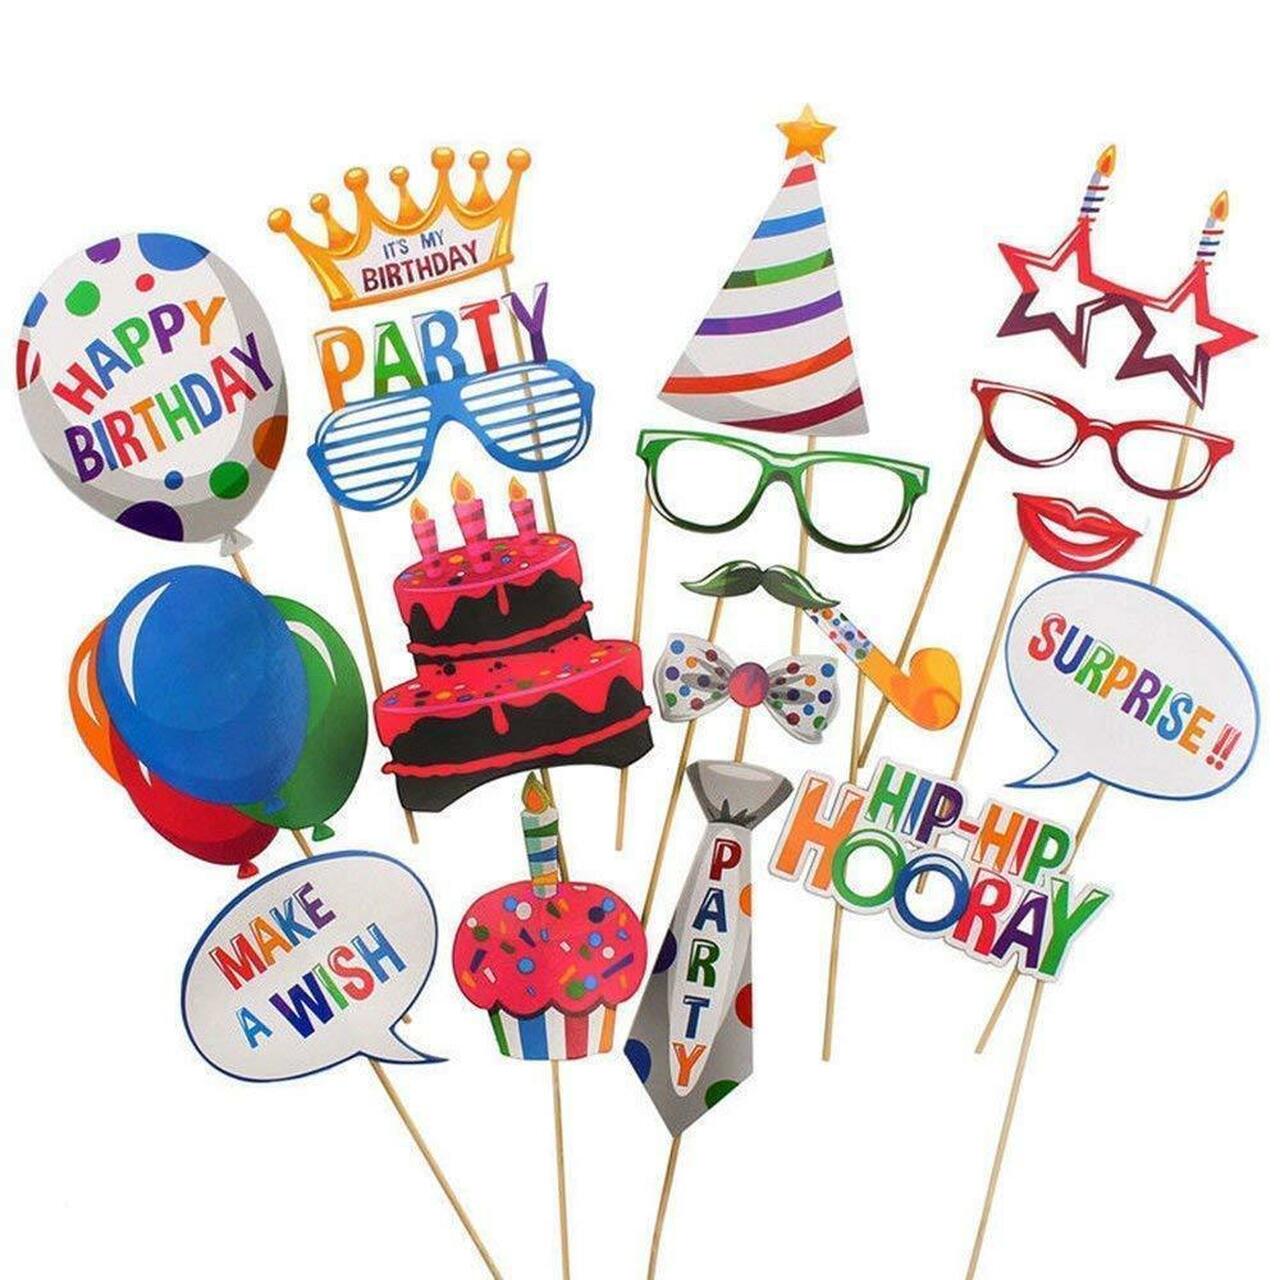 https://eventdecorshop.co.uk/shop-by-theme/event-types/birthday-party/?_bc_fsnf=1&Type=Props